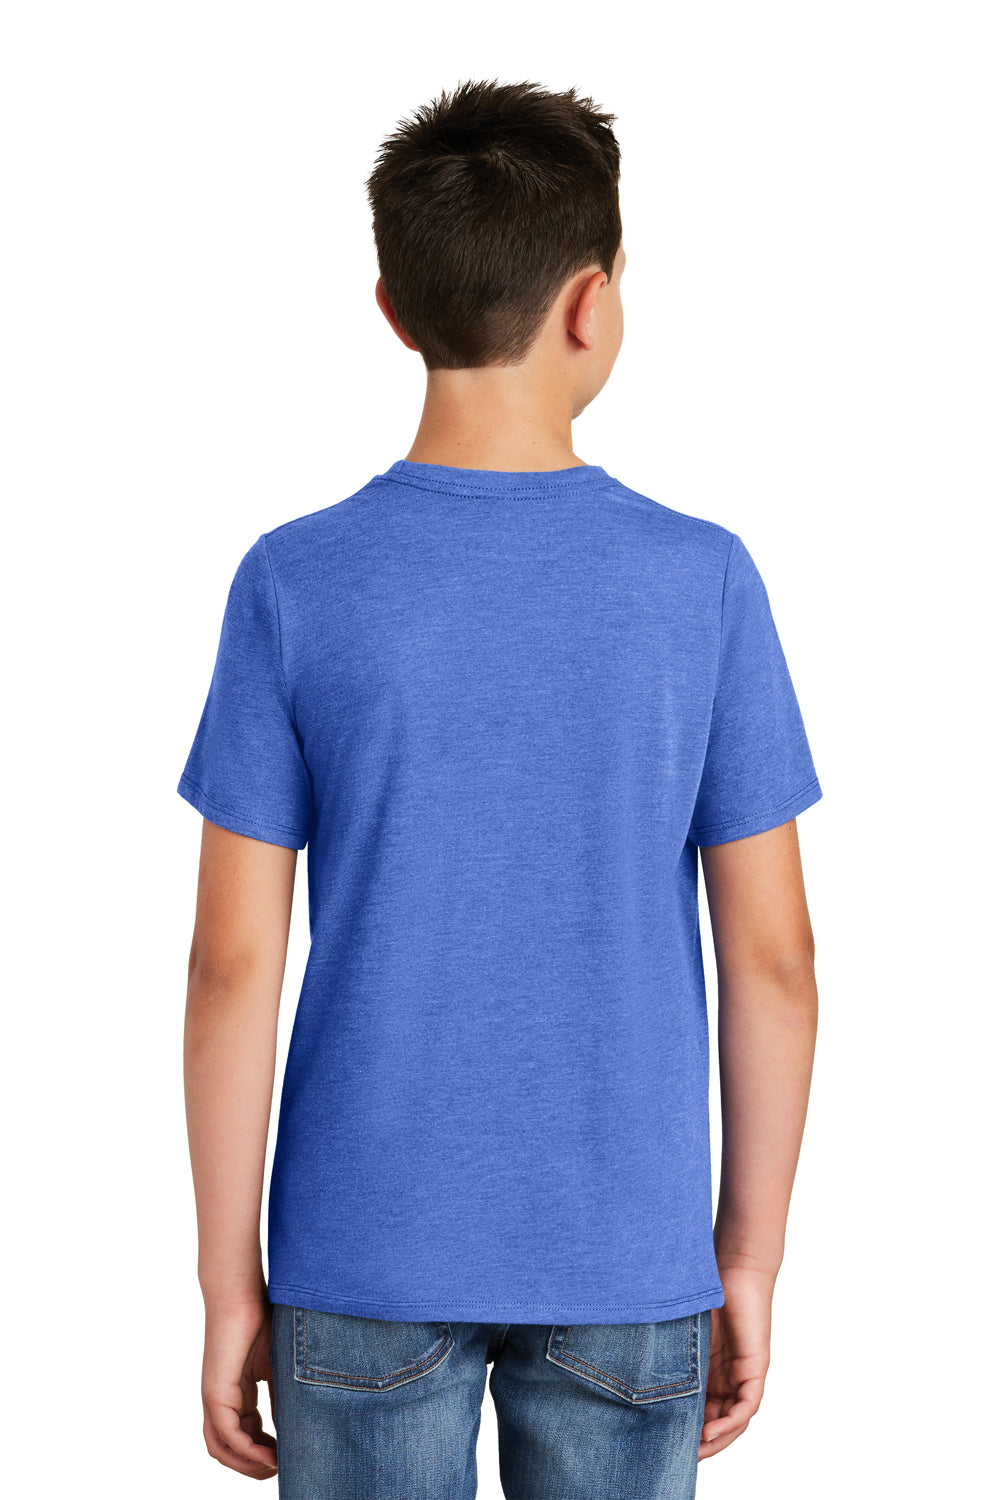 District DT130Y Youth Perfect Tri Short Sleeve Crewneck T-Shirt Royal Blue Frost Back